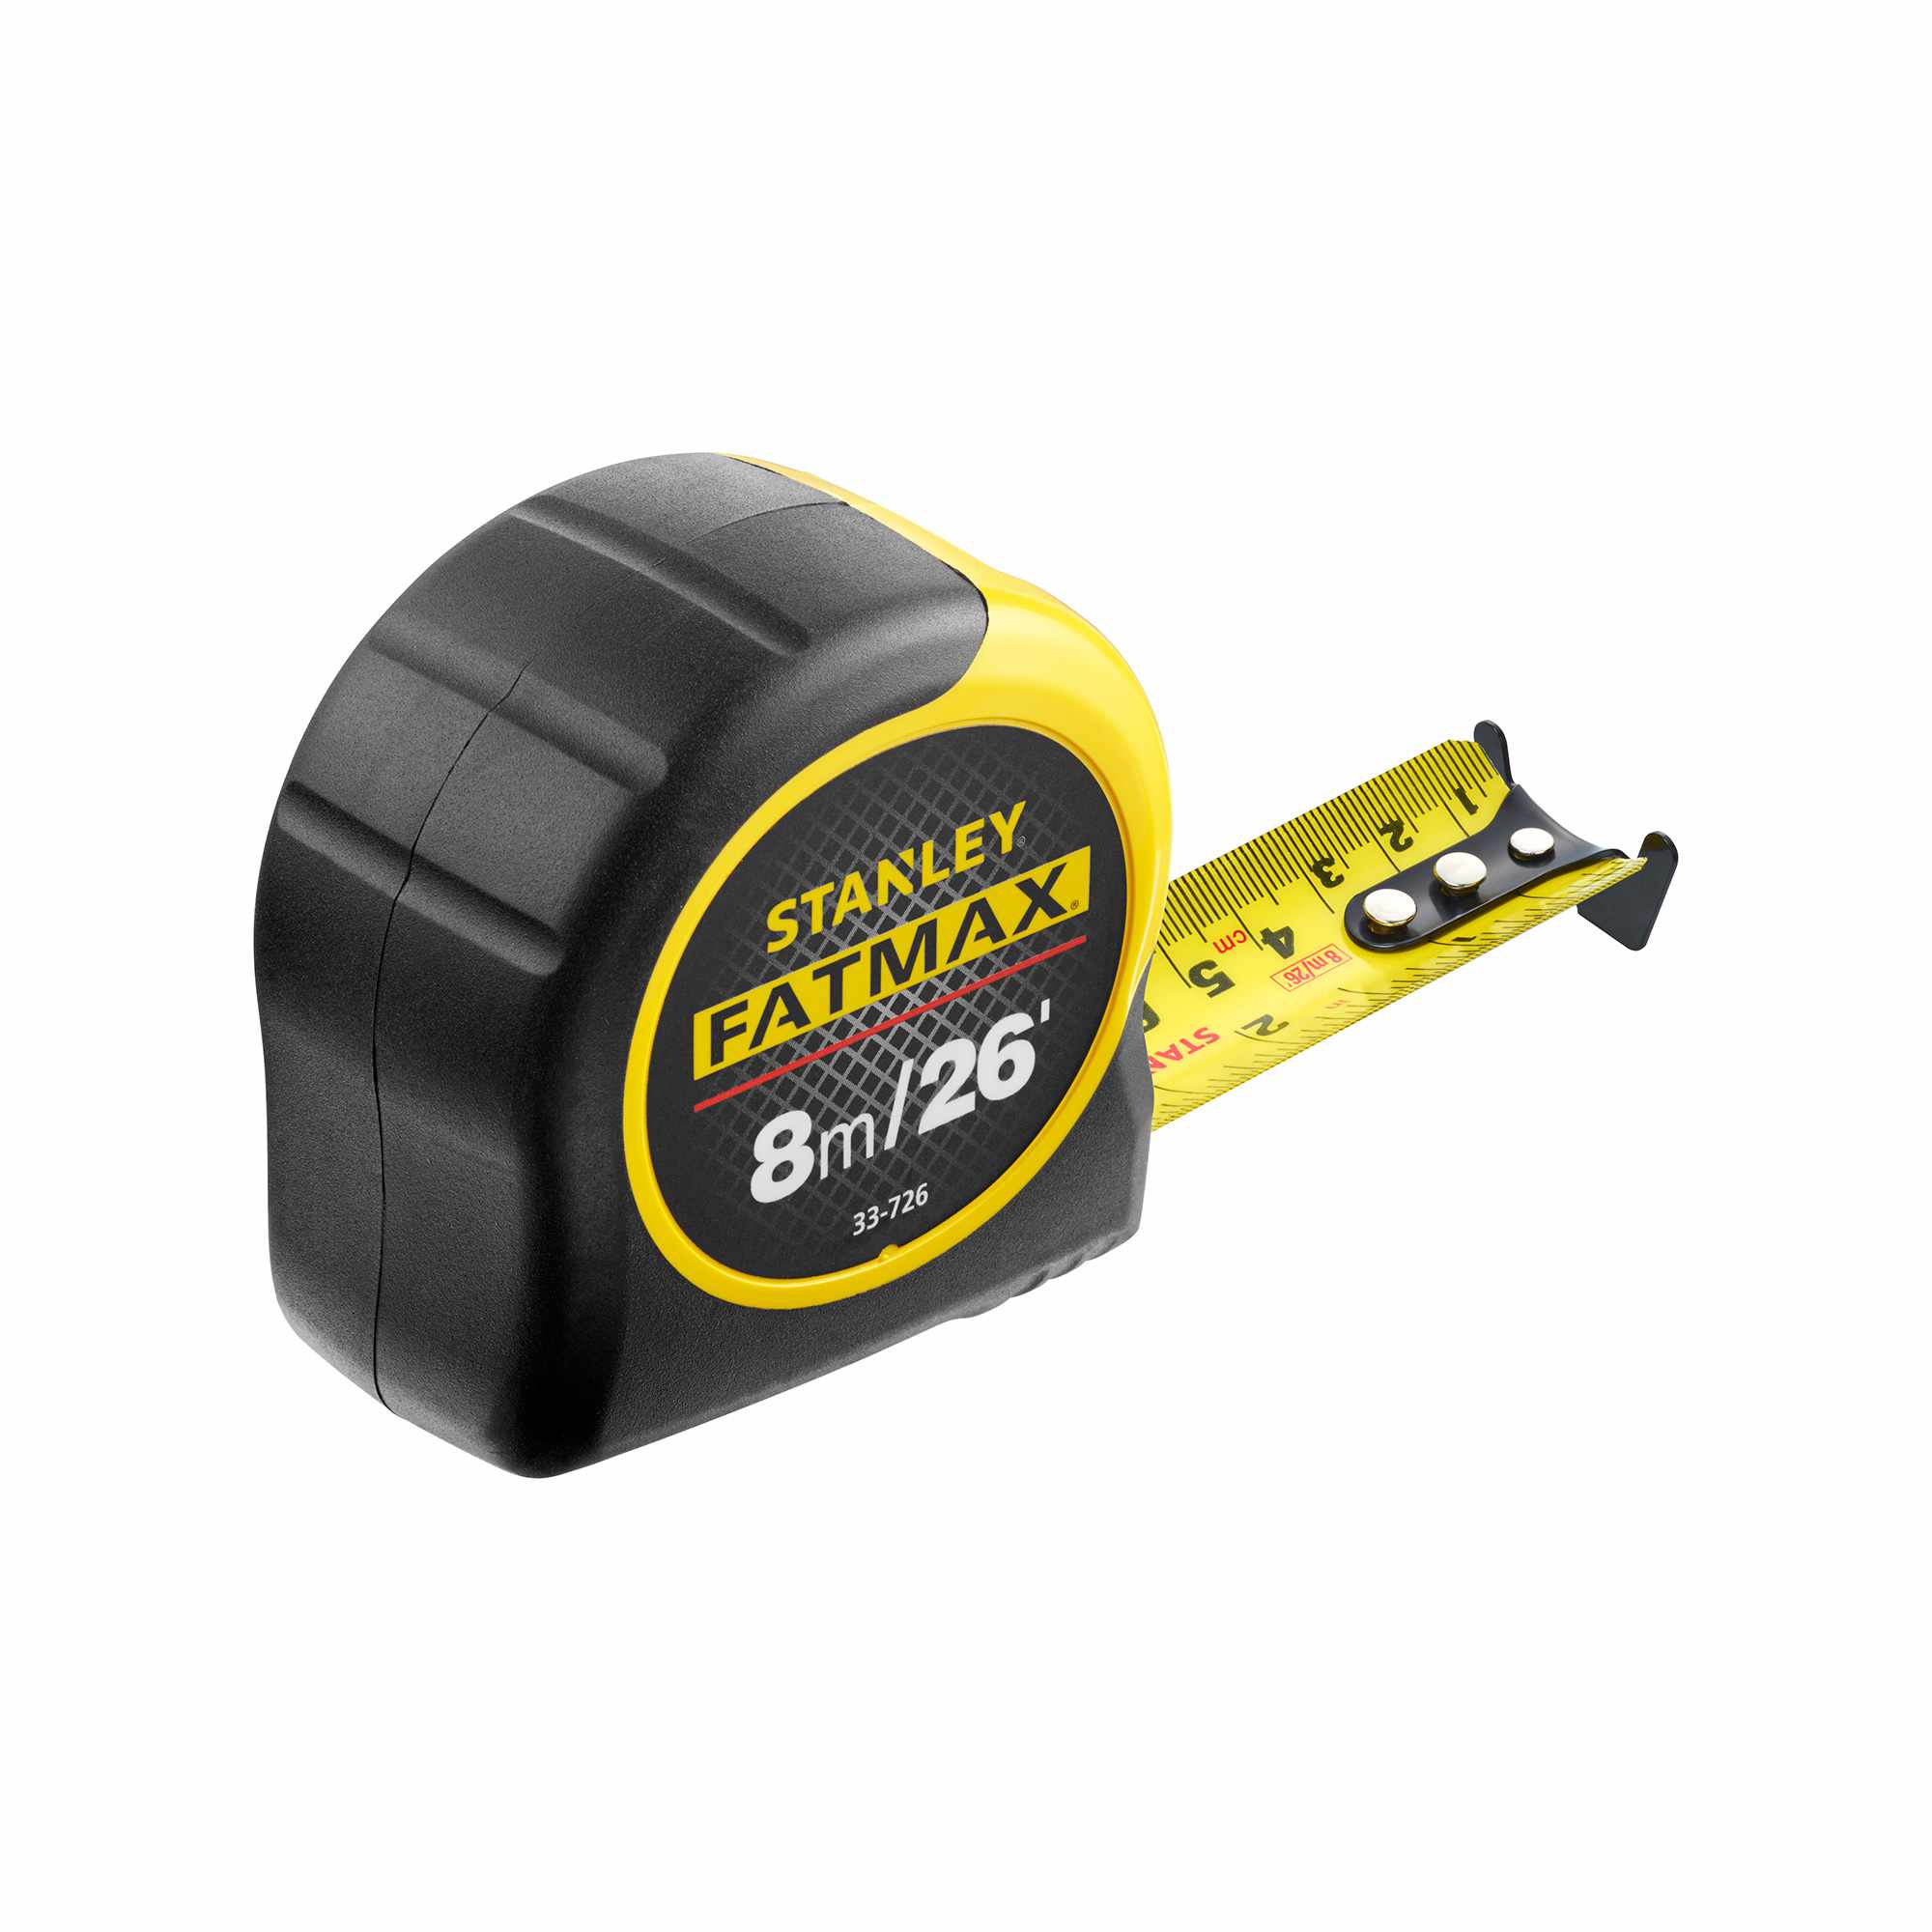 Stanley 0 33 726 Fatmax 8m26 Tape With Armor Toolstore Uk